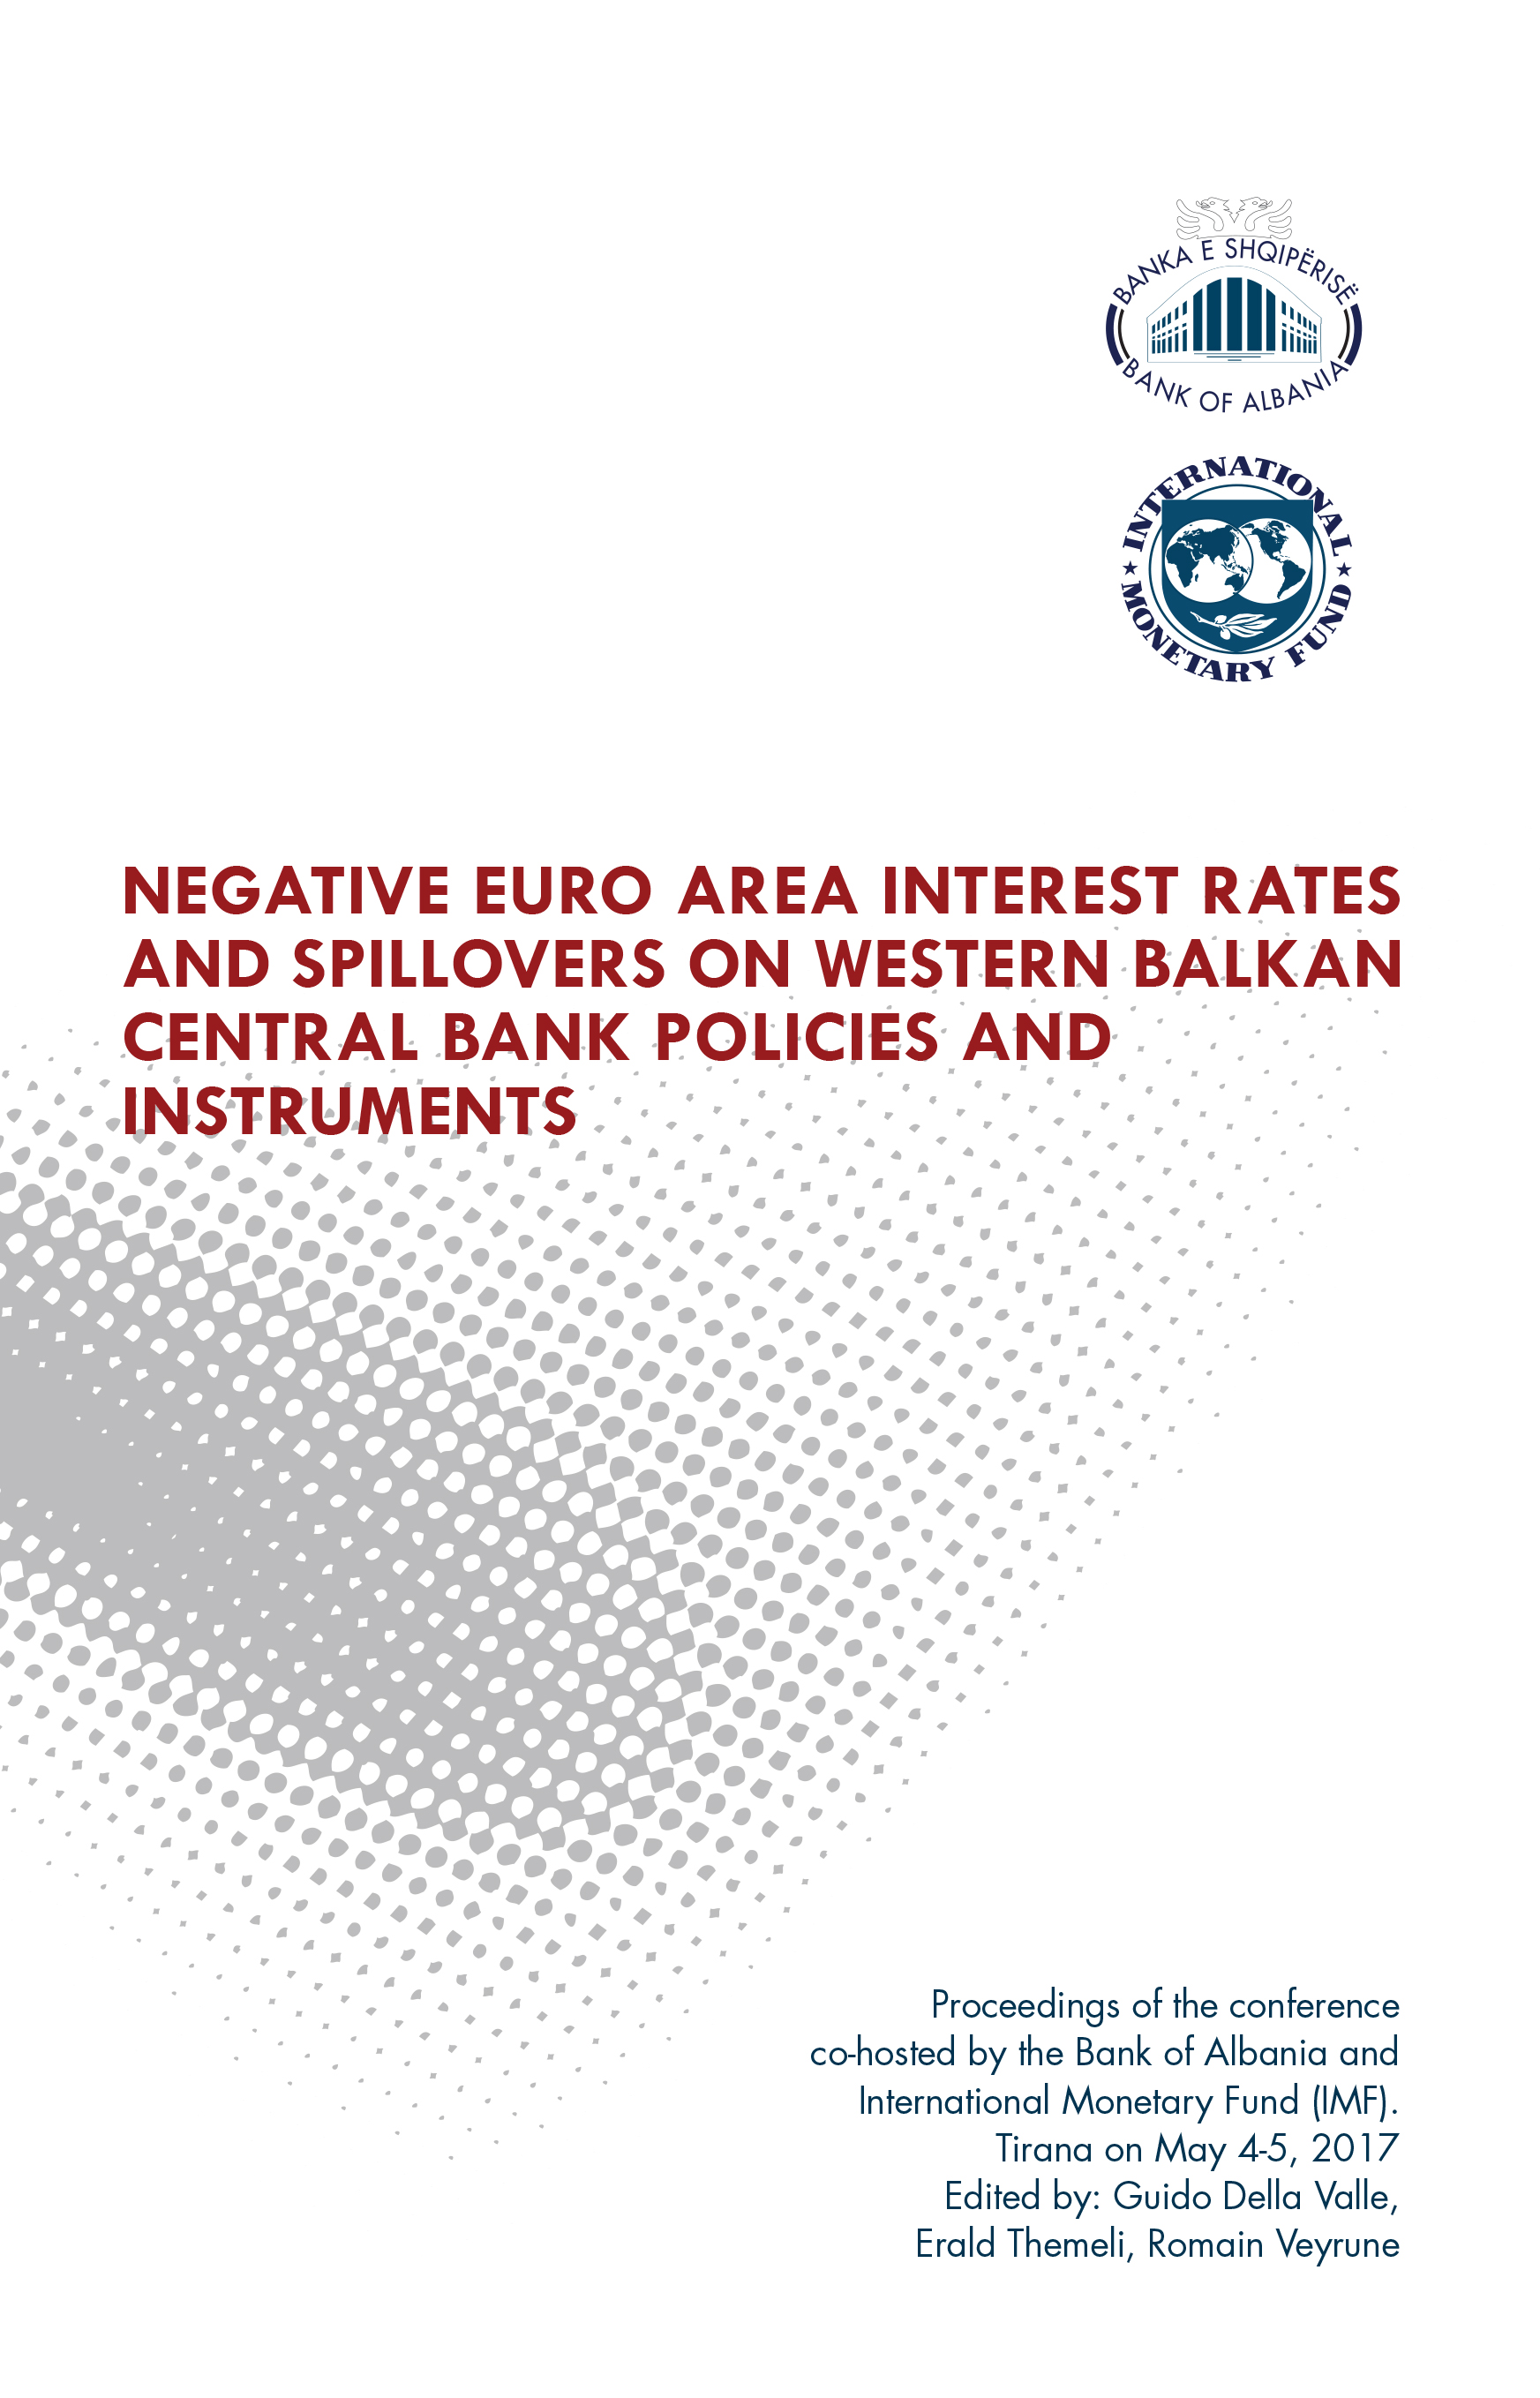 Negative Euro area interest rates and spillovers on Western Balkan Central Bank policies and instruments